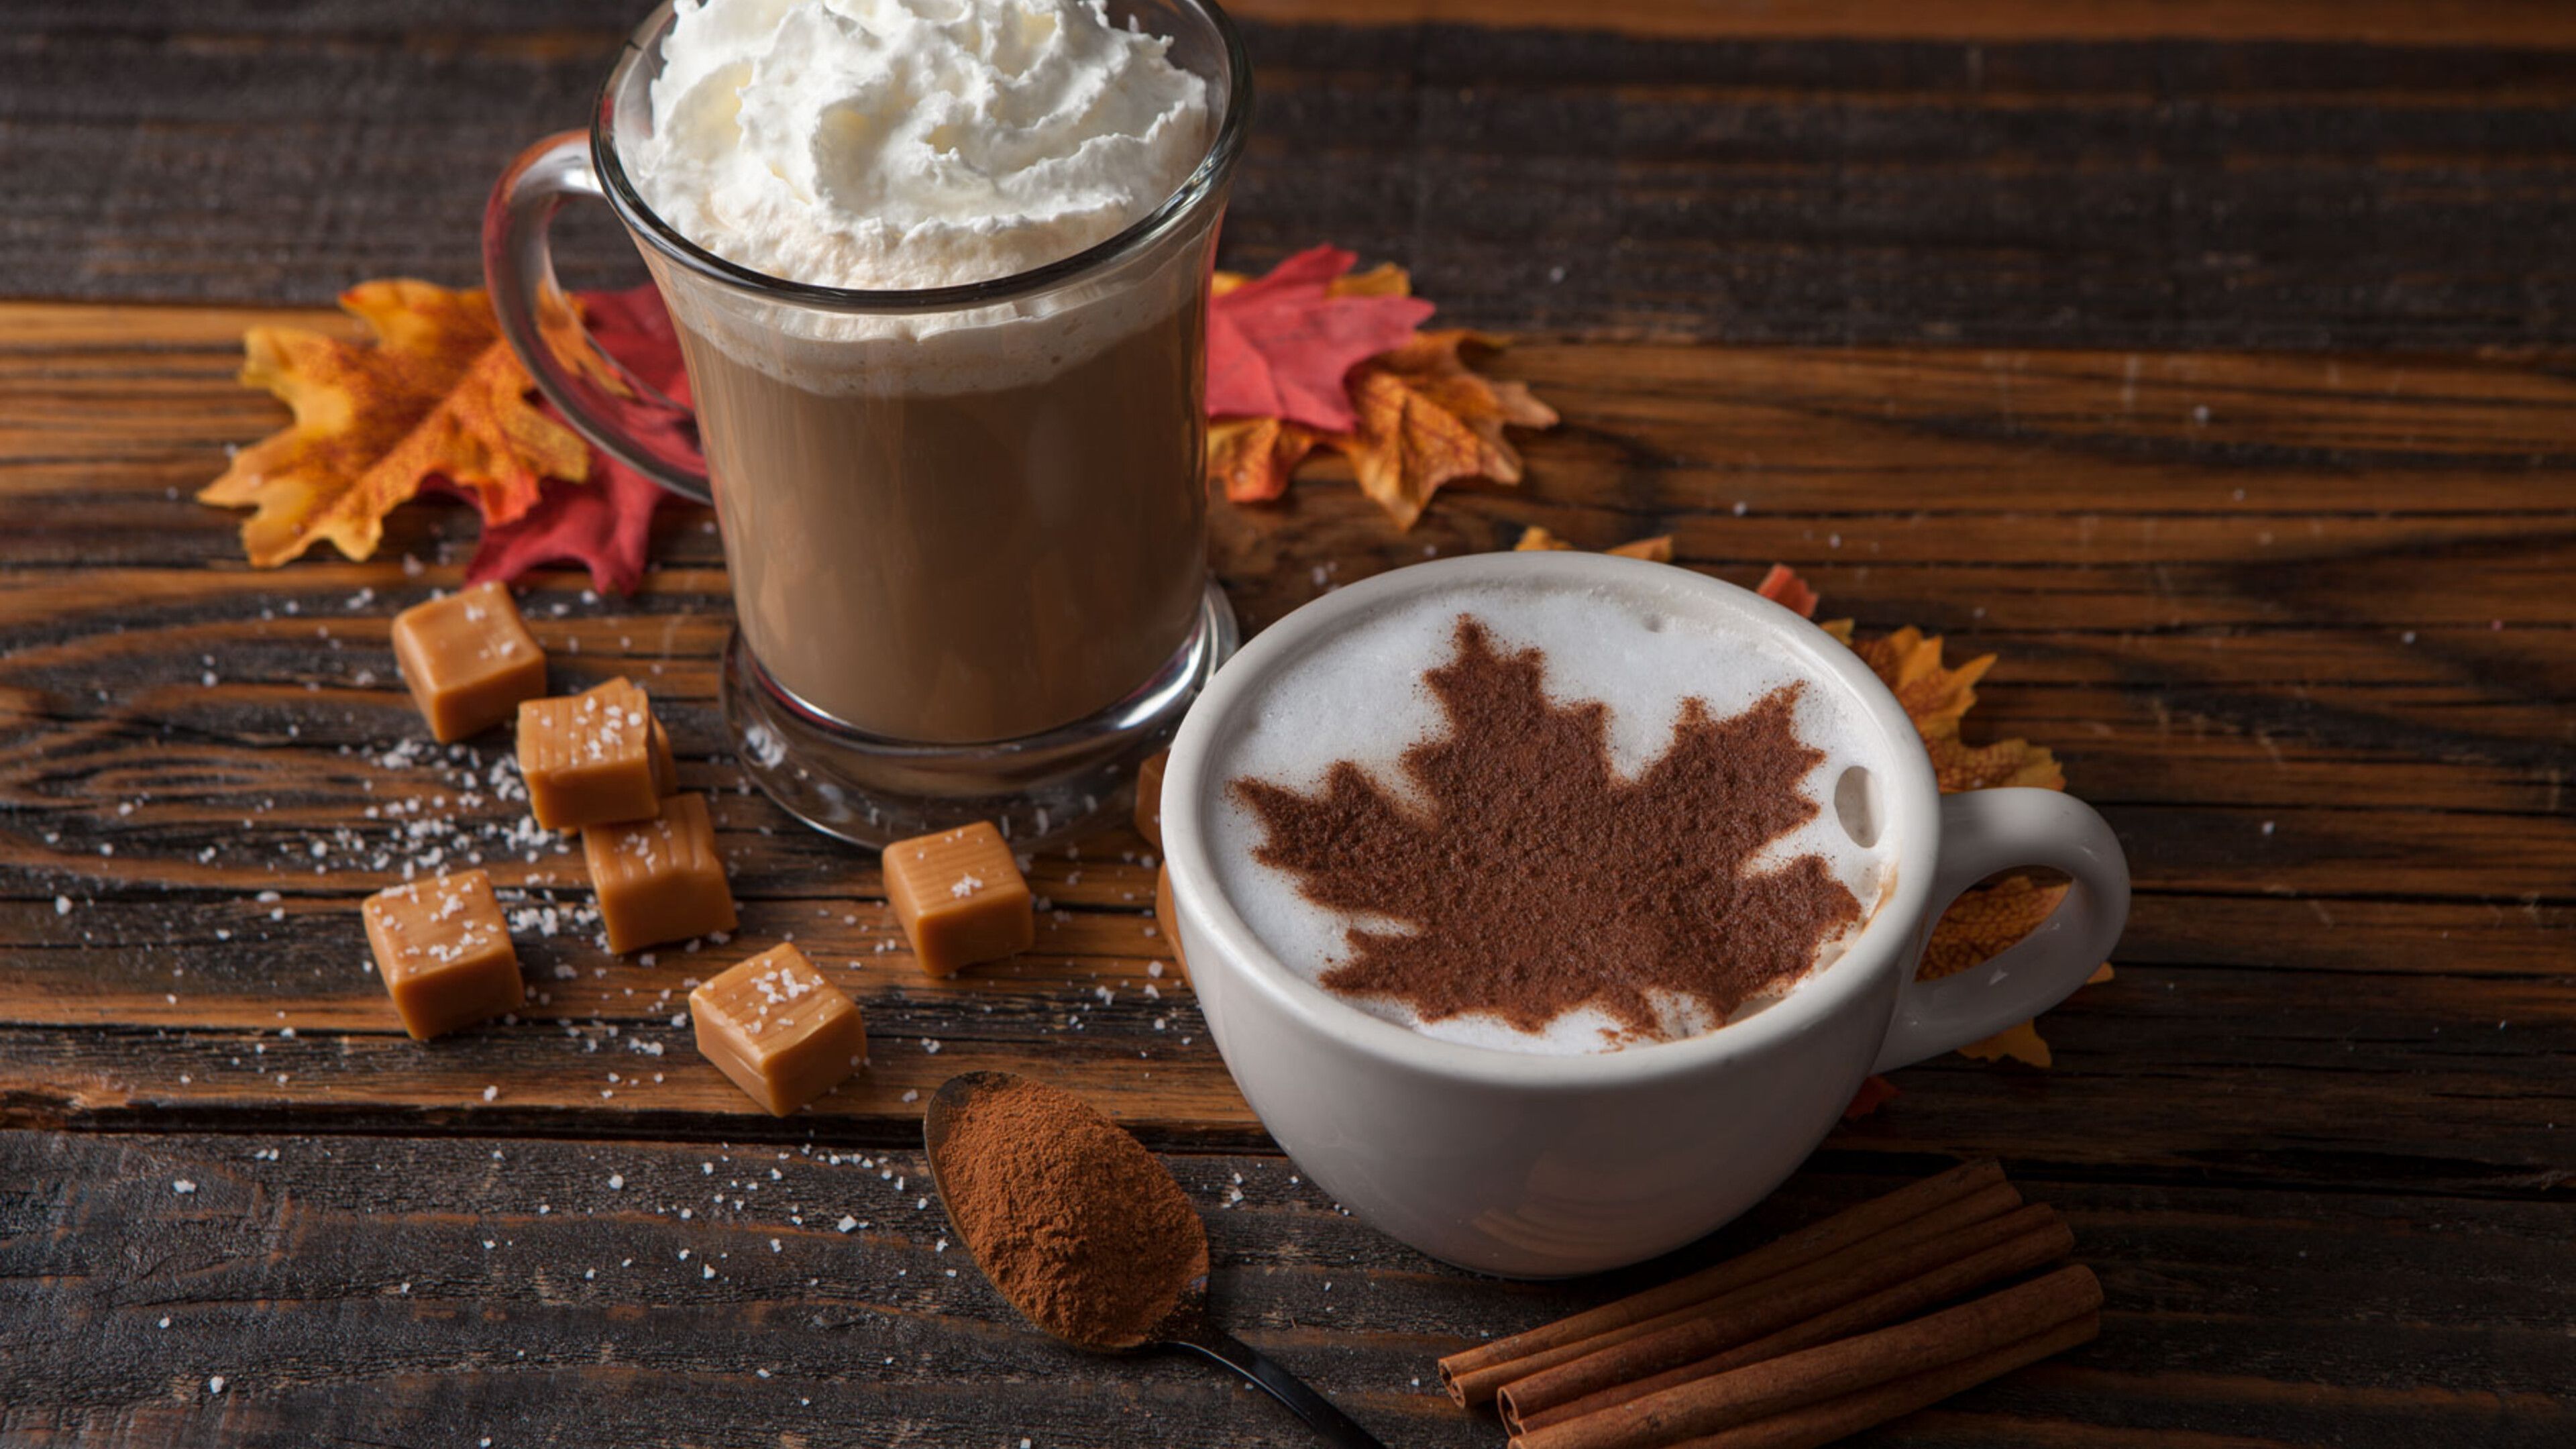 Autumn cinnamon leaf in a cup of hot coffee